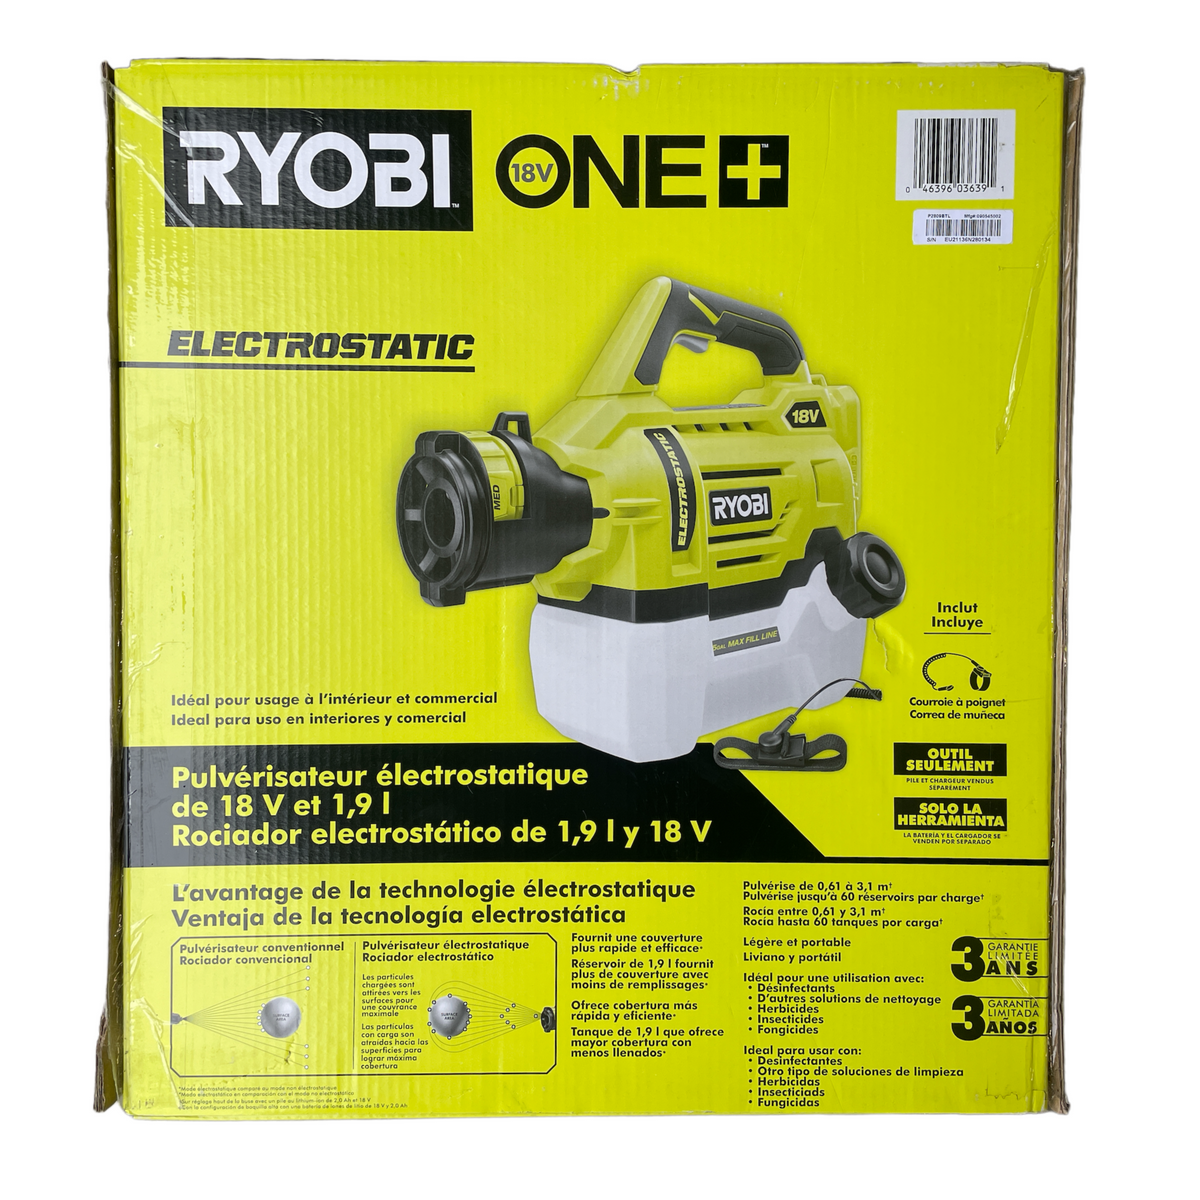 ONE+ 18-Volt Cordless Electrostatic 0.5 Gal. Sprayer (Tool Only) – Ryobi  Deal Finders